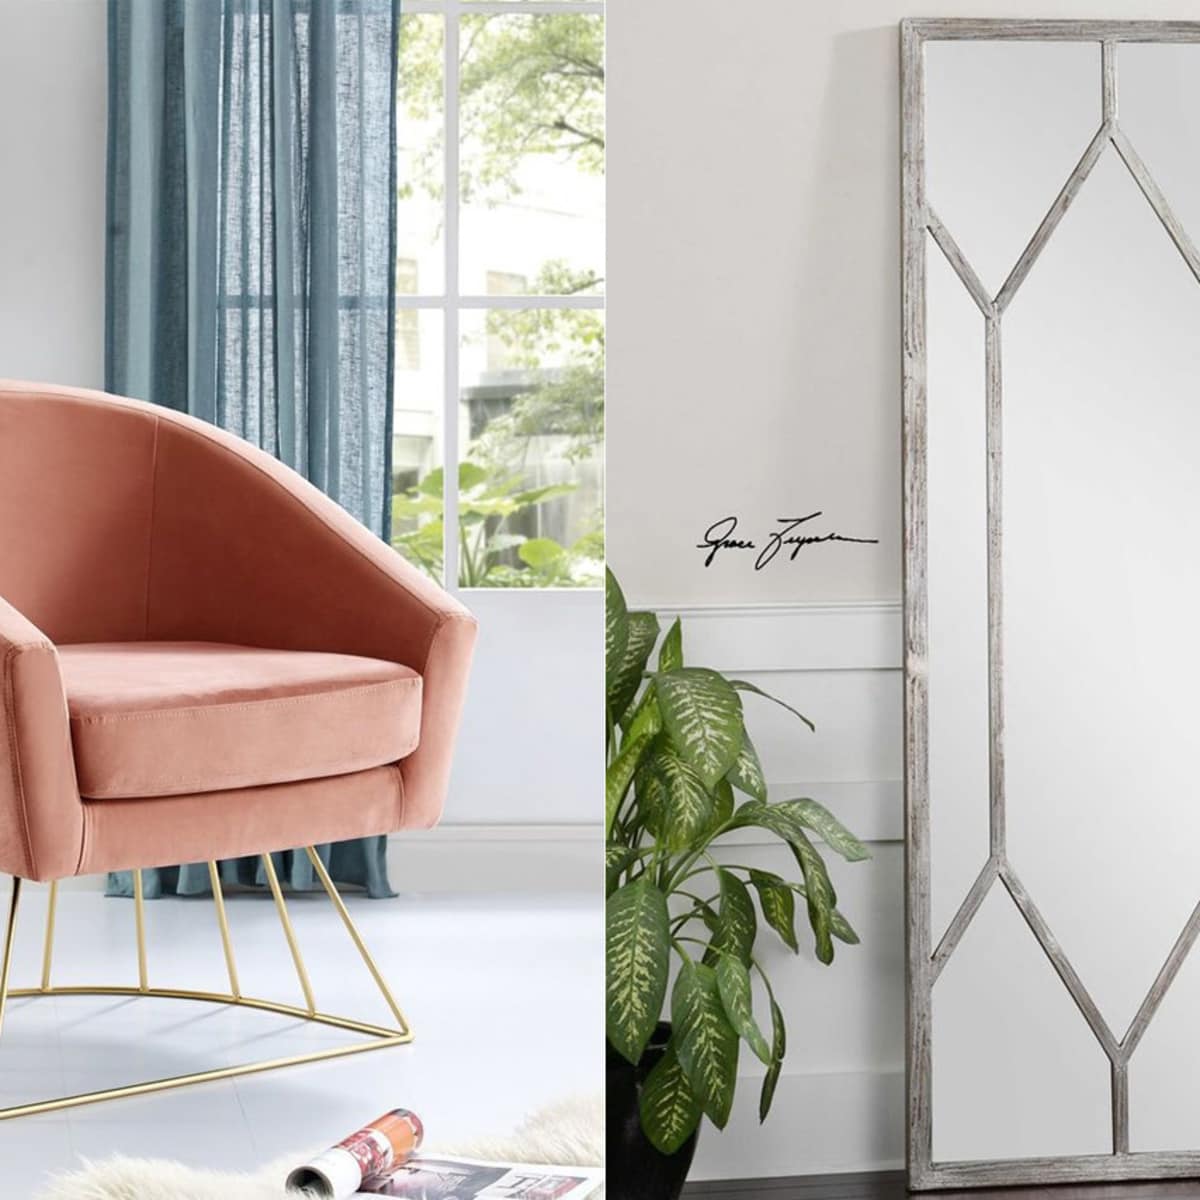 Popular Home Decor Store Houzz Is Having A Massive Furniture Sale